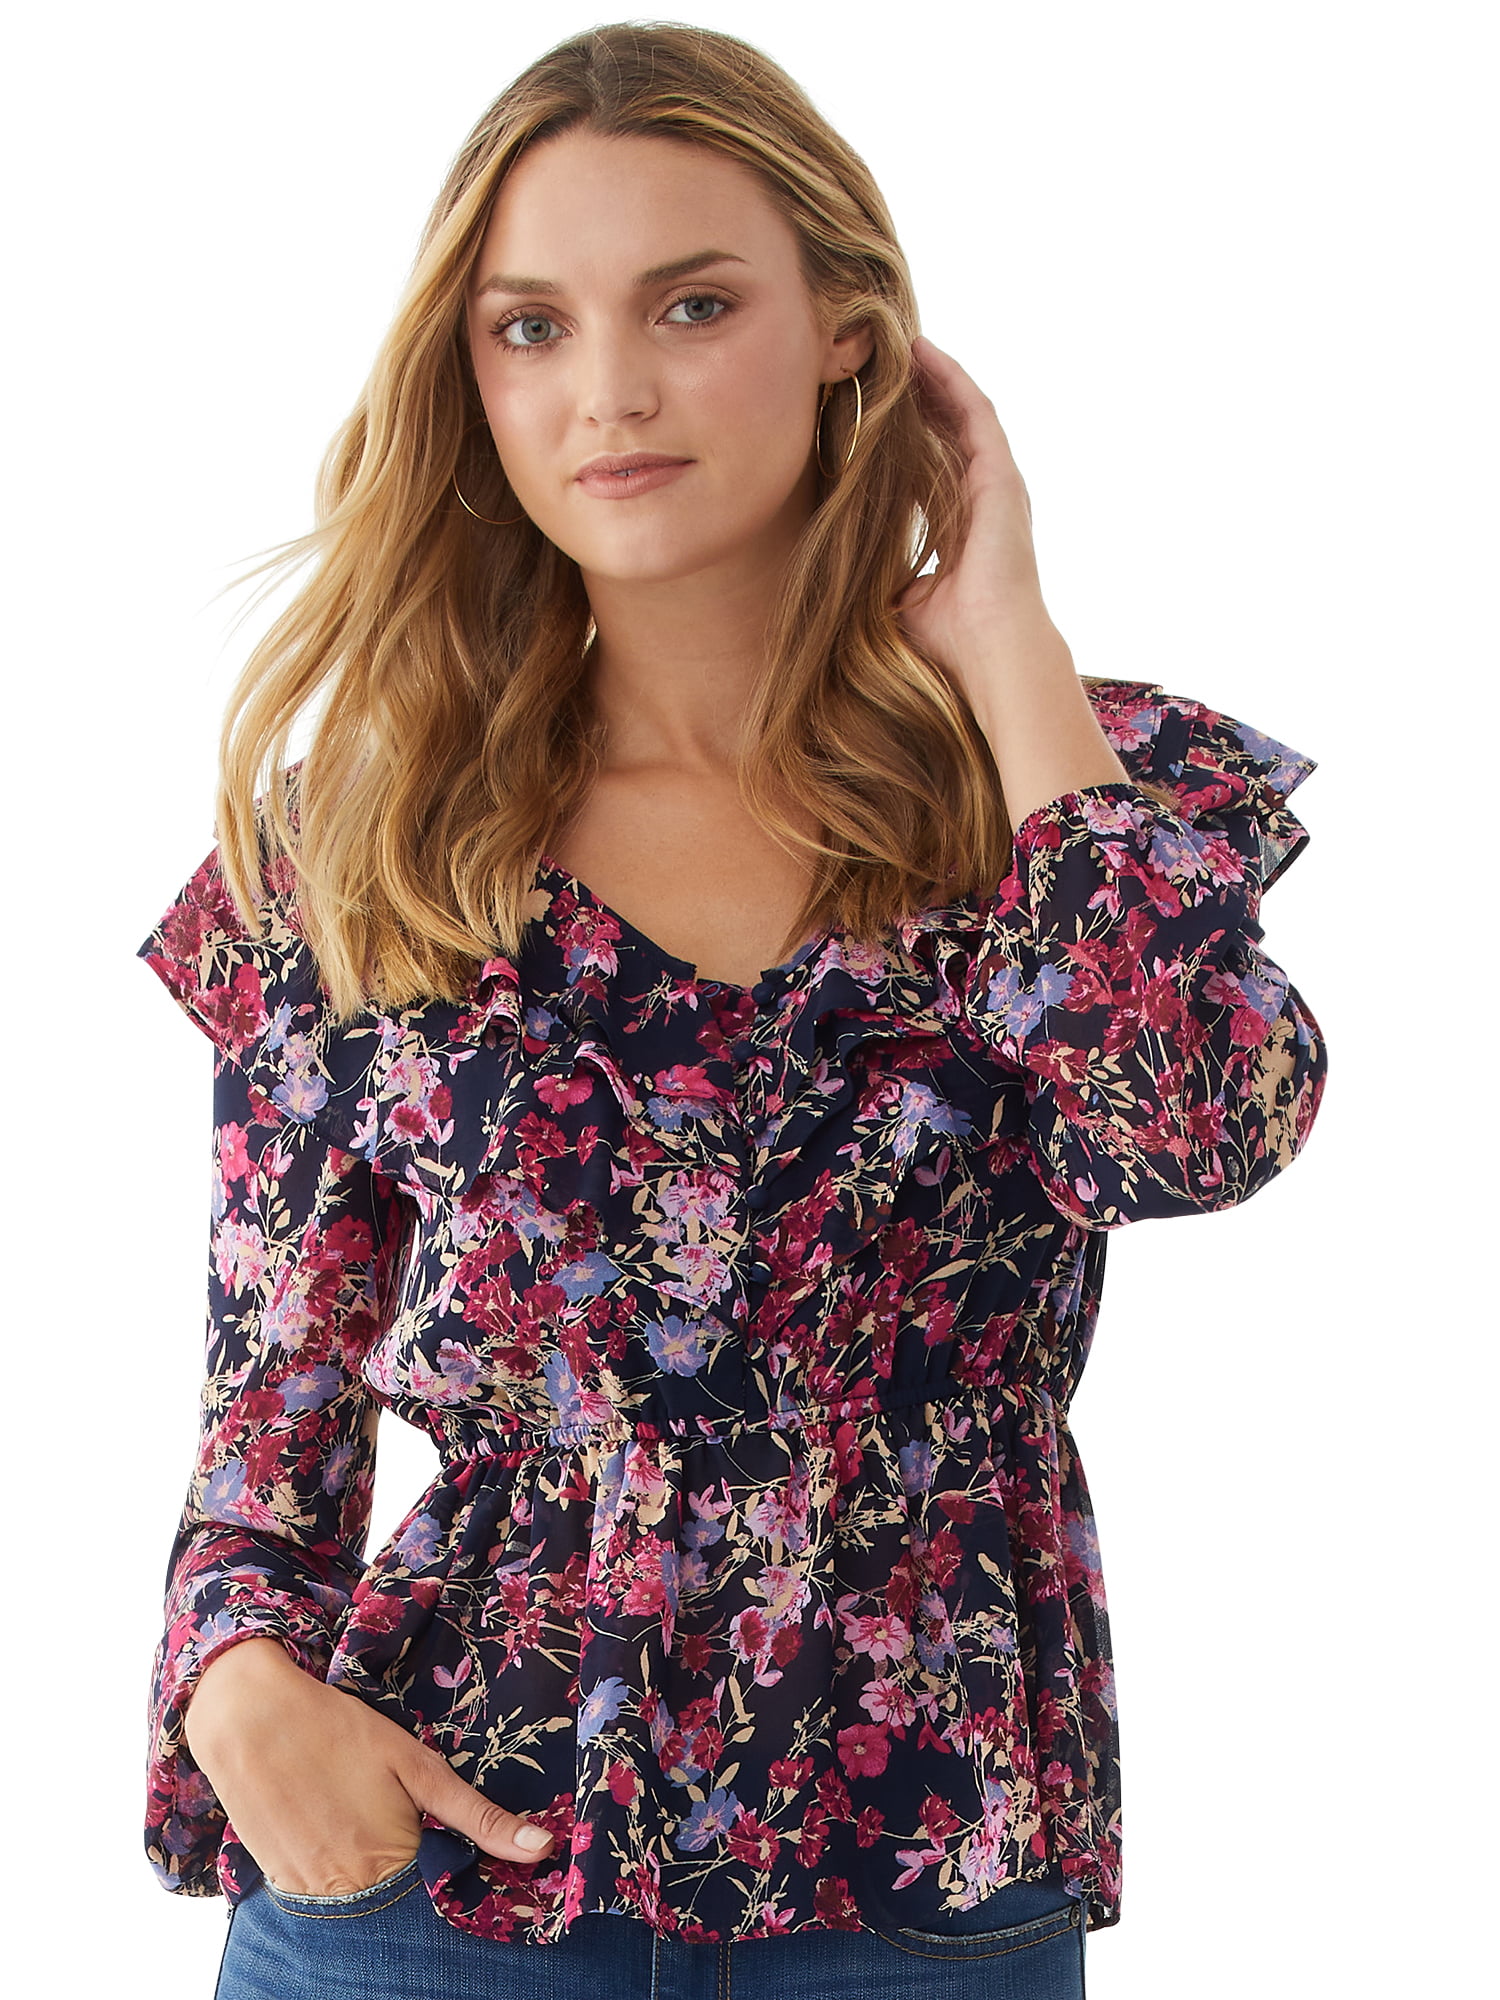 Scoop Women's Printed Ruffle Blouse with Long Sleeves - Walmart.com